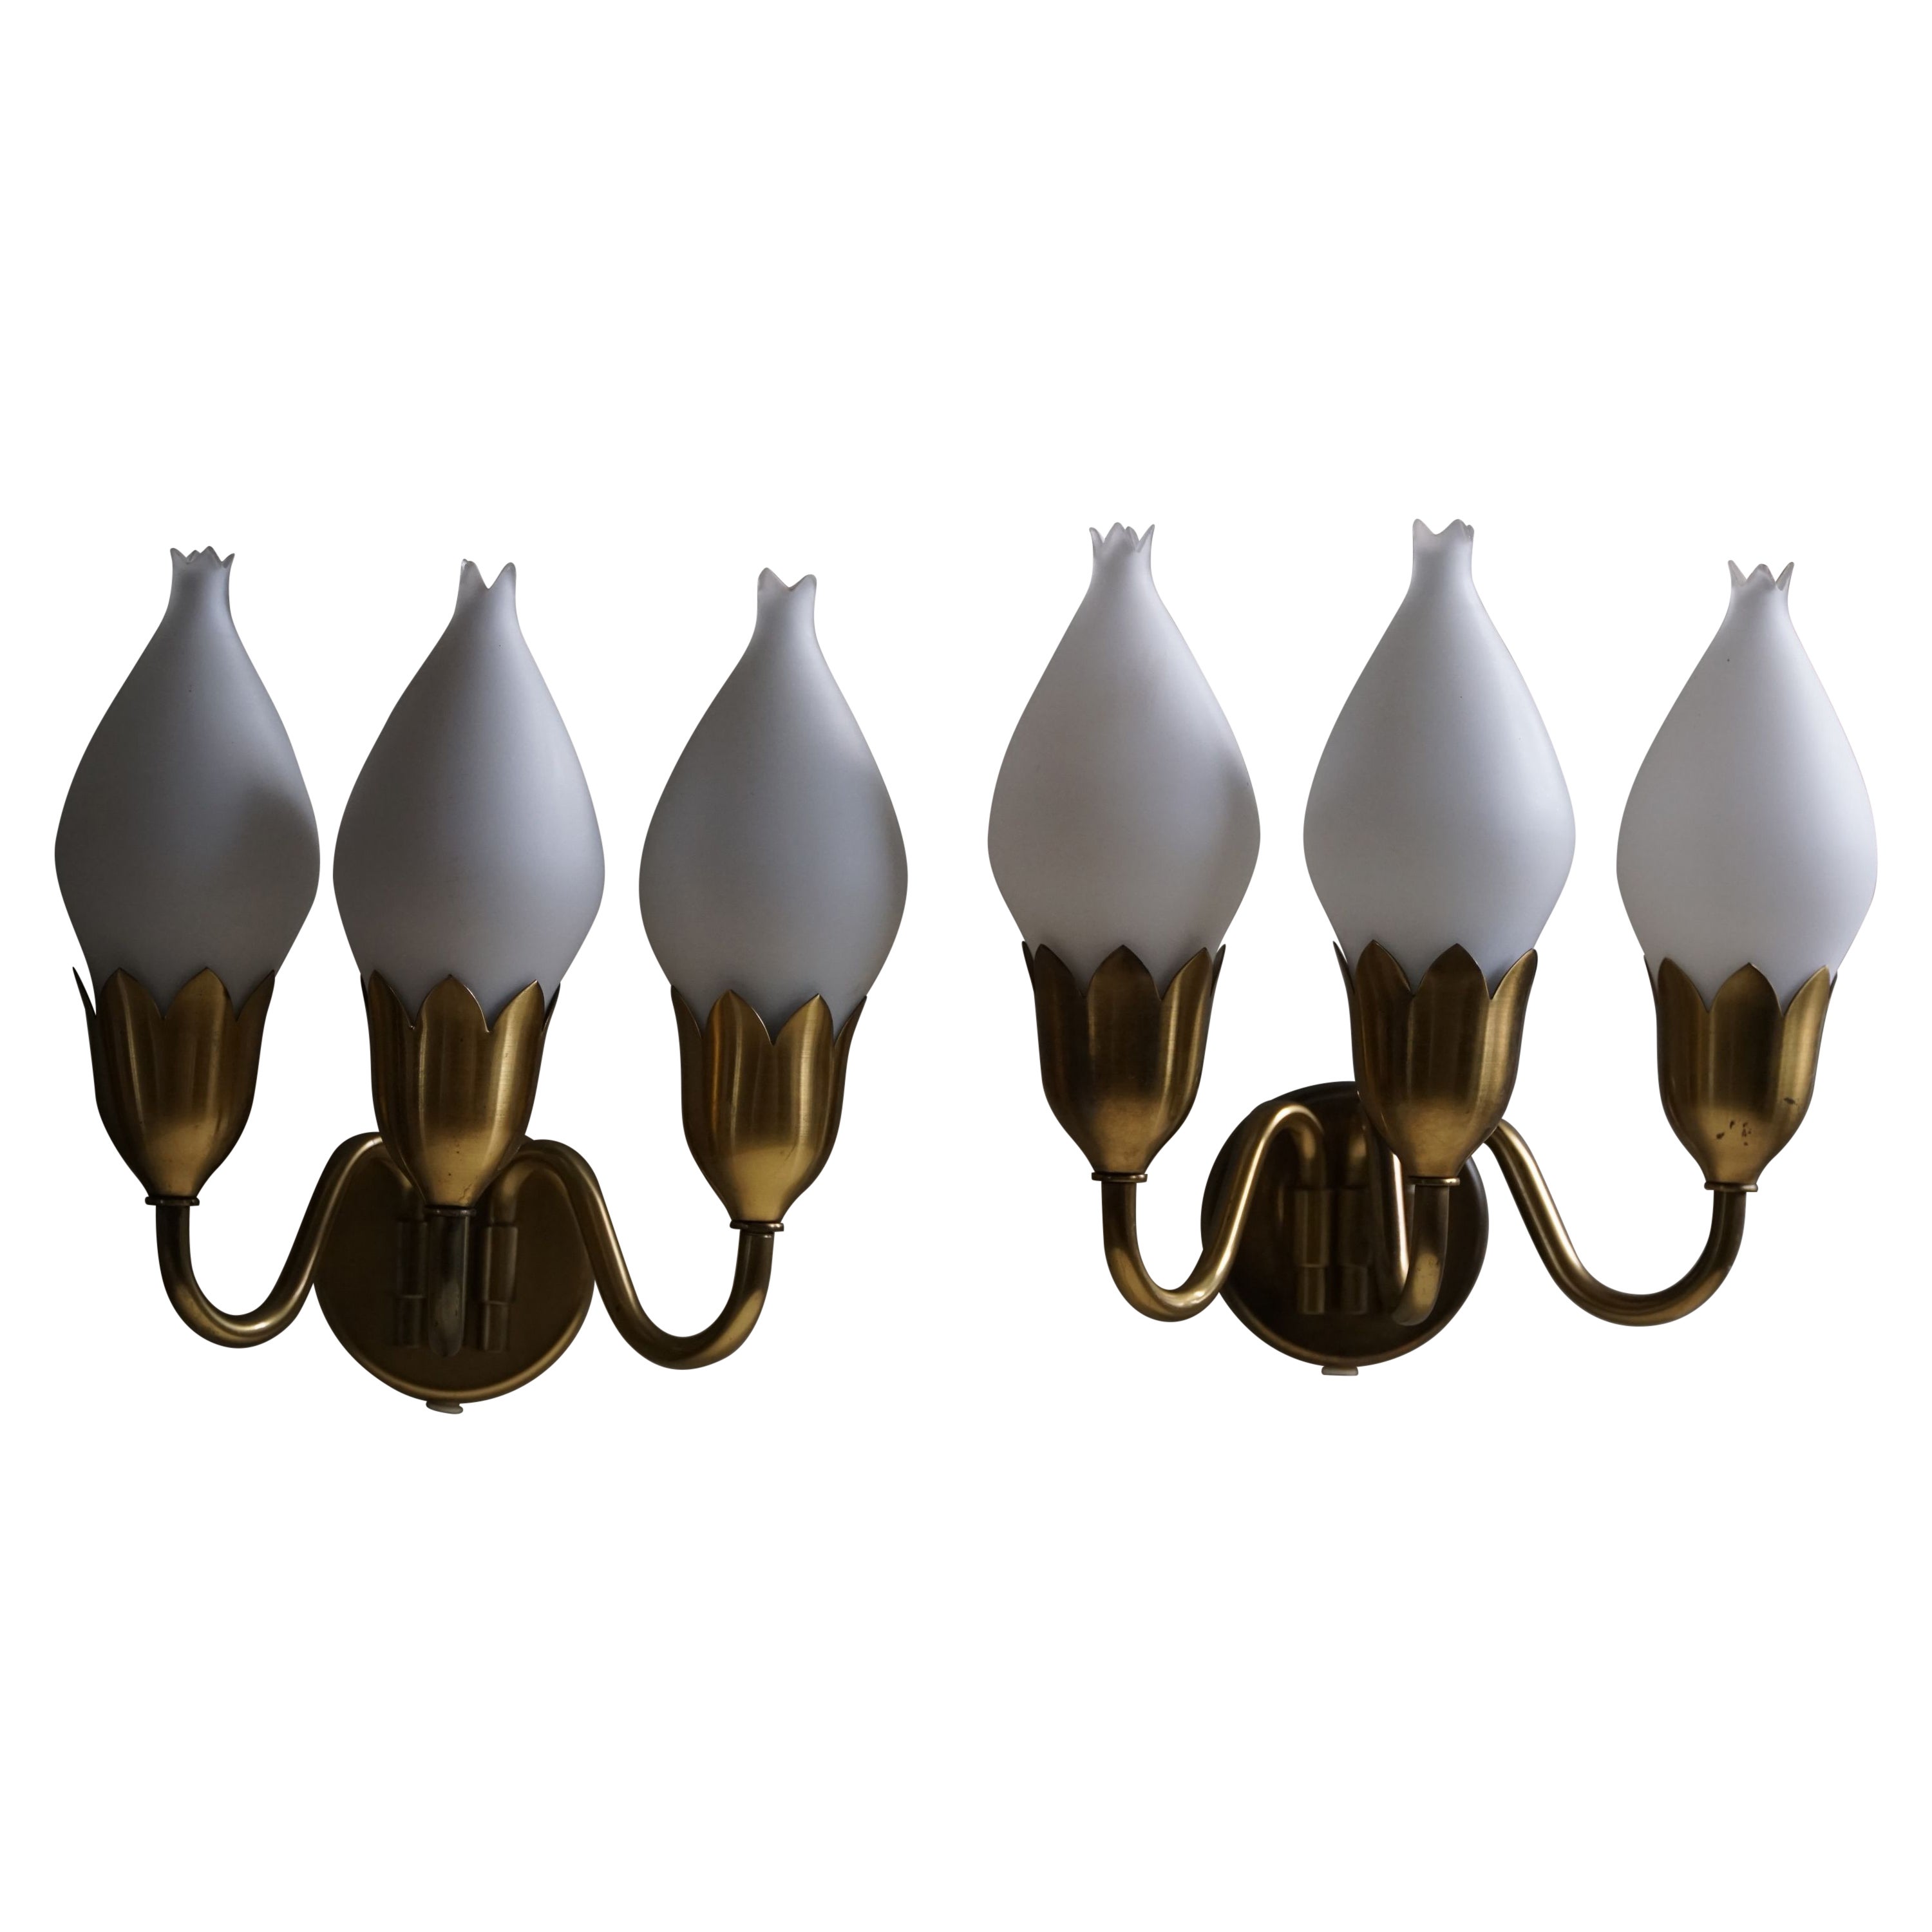 Fog & Mørup, A Pair of 3-Arm "Tulip" Wall Lamps, Danish Modern, 1950s